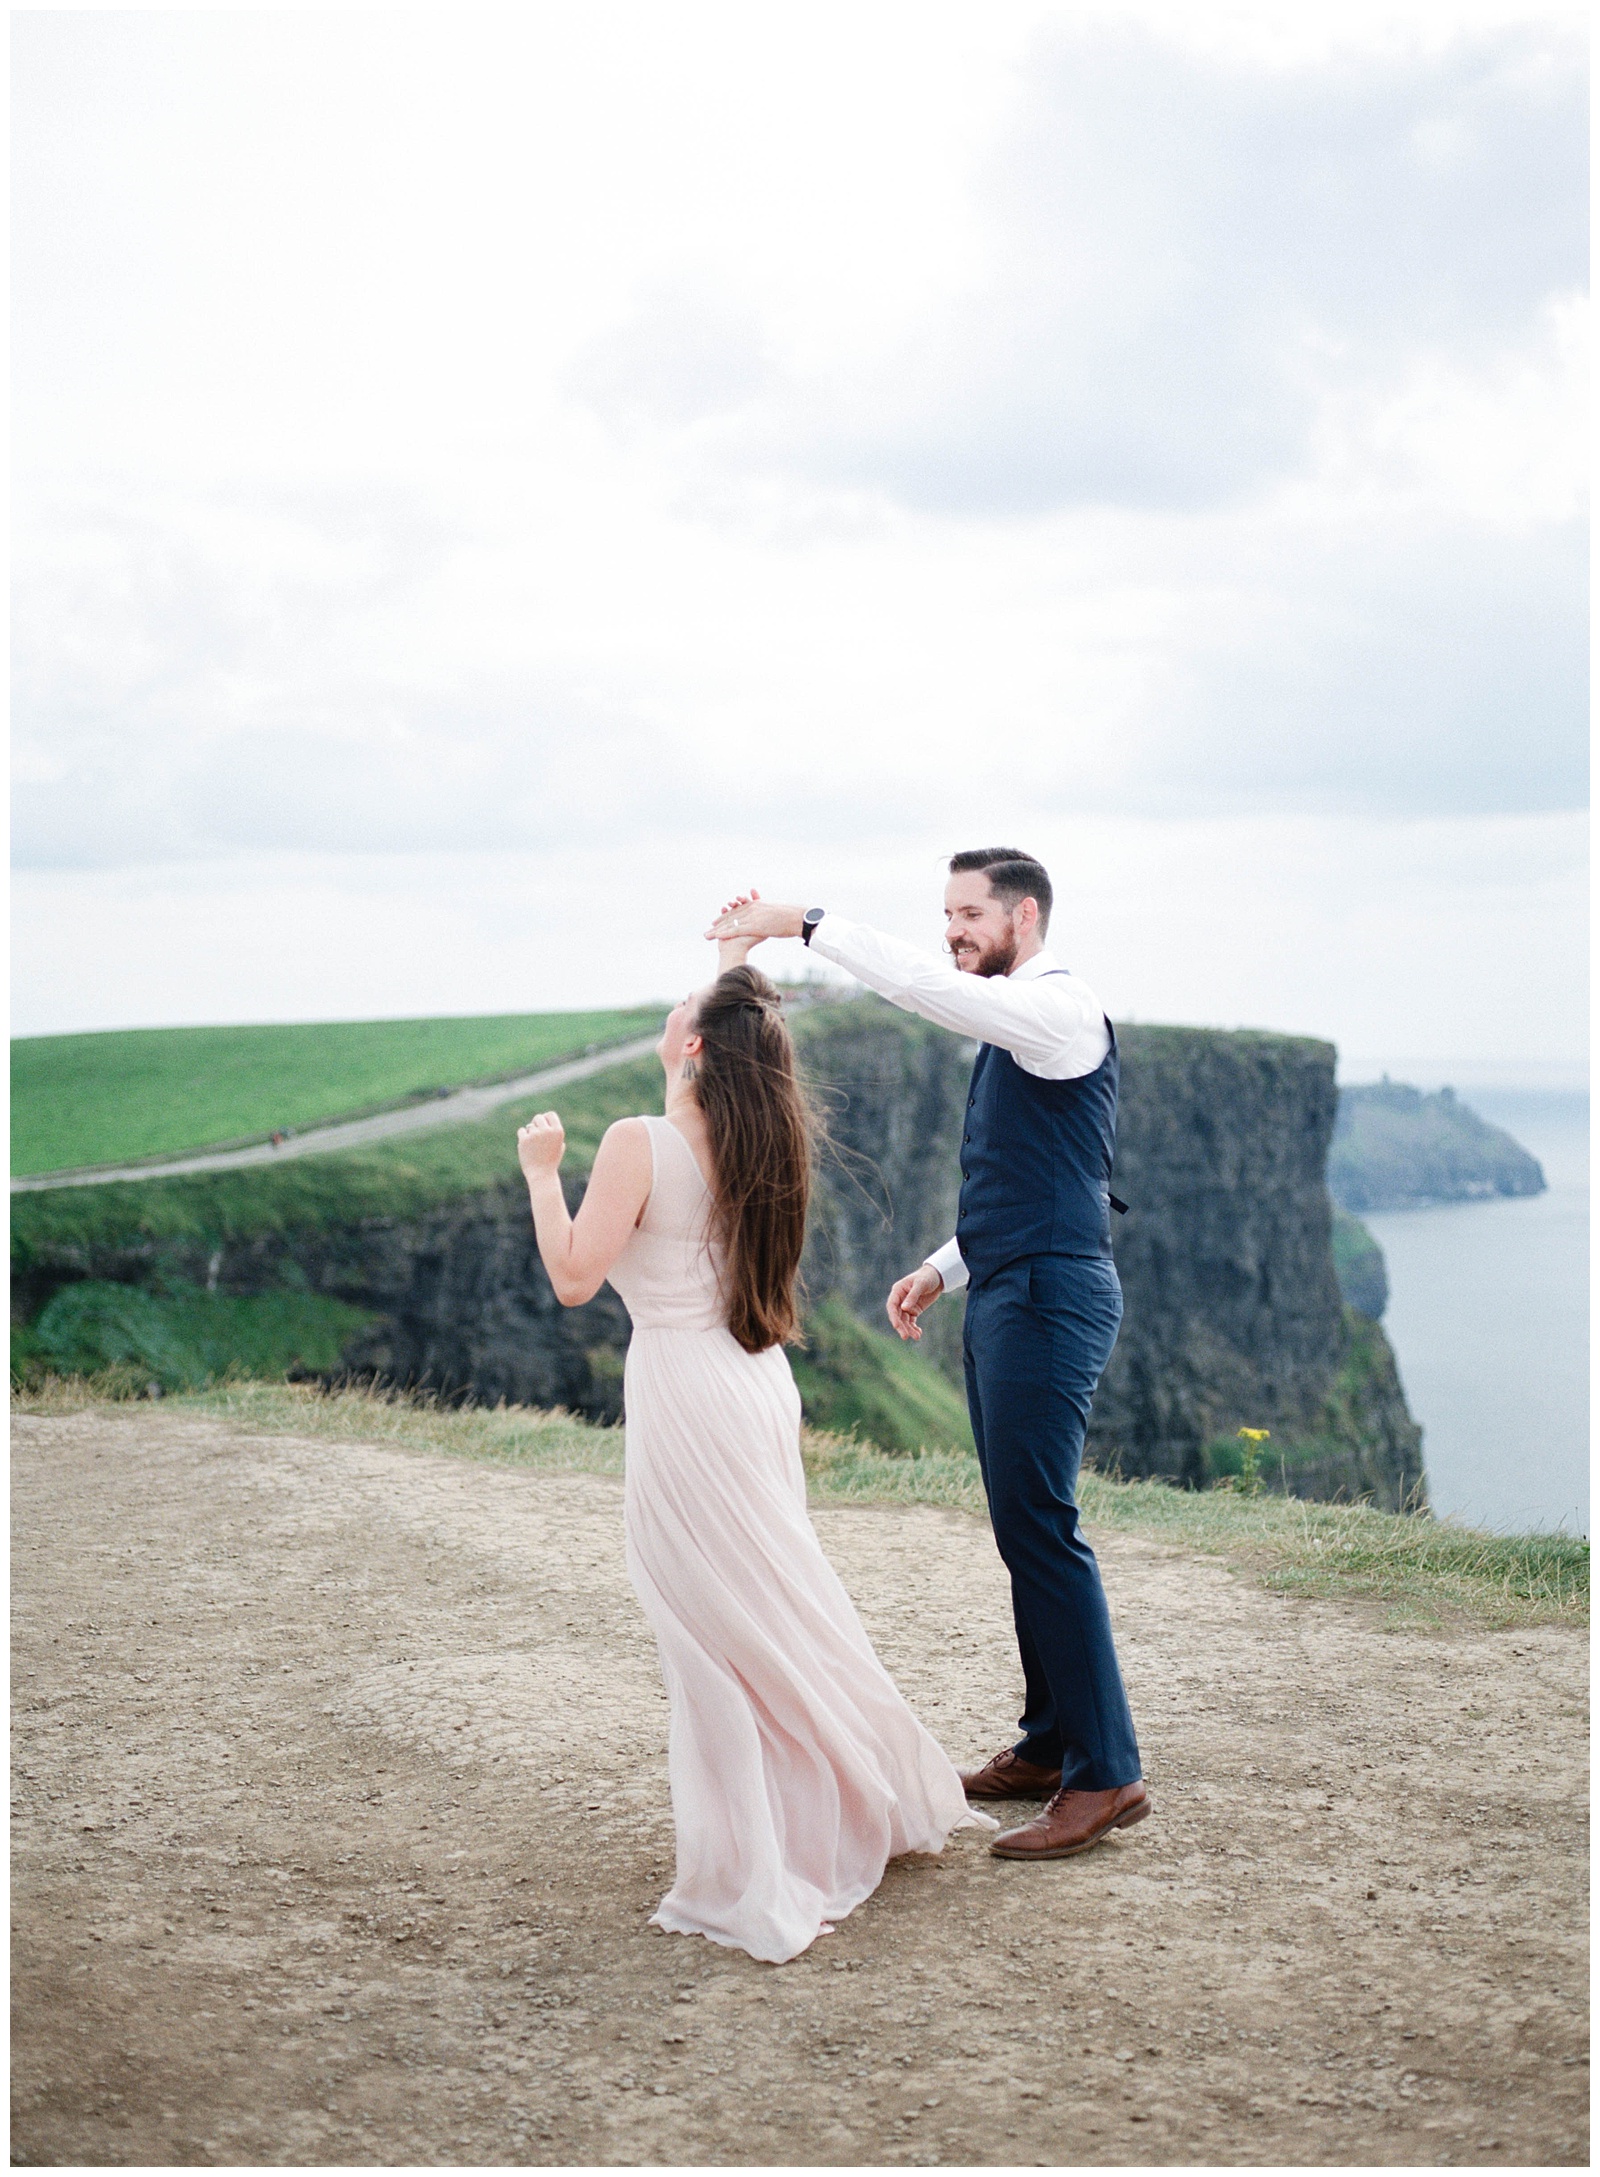 Luxury Destination Wedding Photographer Cliffs of Moher Anniversary Session on Film with Sarah Sunstrom Photography_0005.jpg